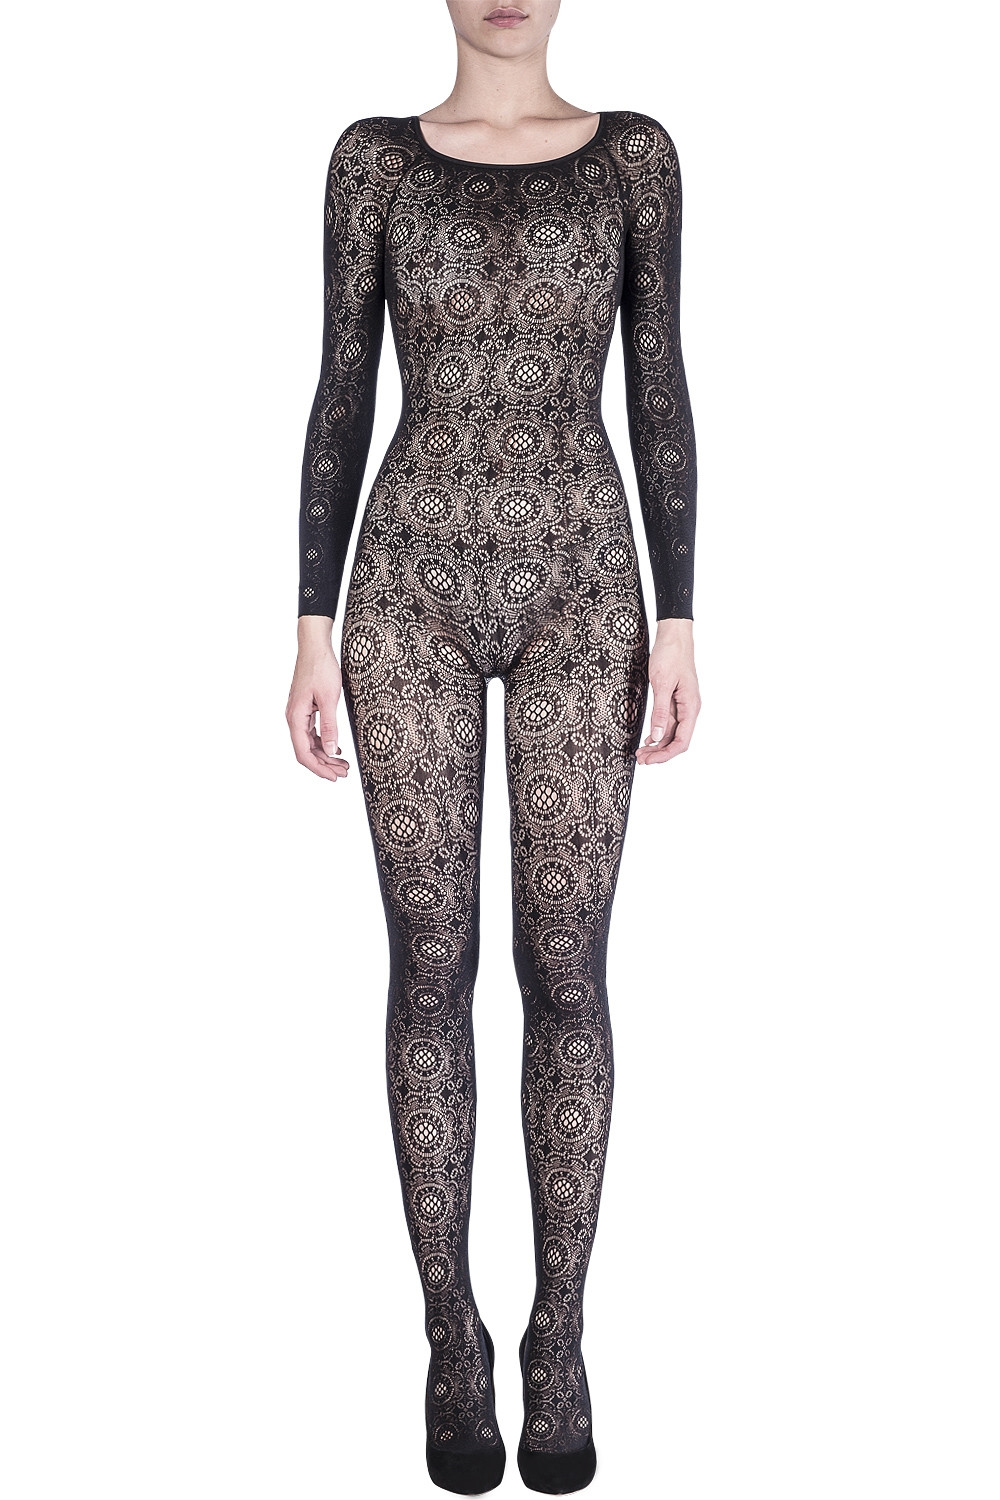 Jumpsuits for Women | Intriguing, seductive bodysuits and bodystockings ...